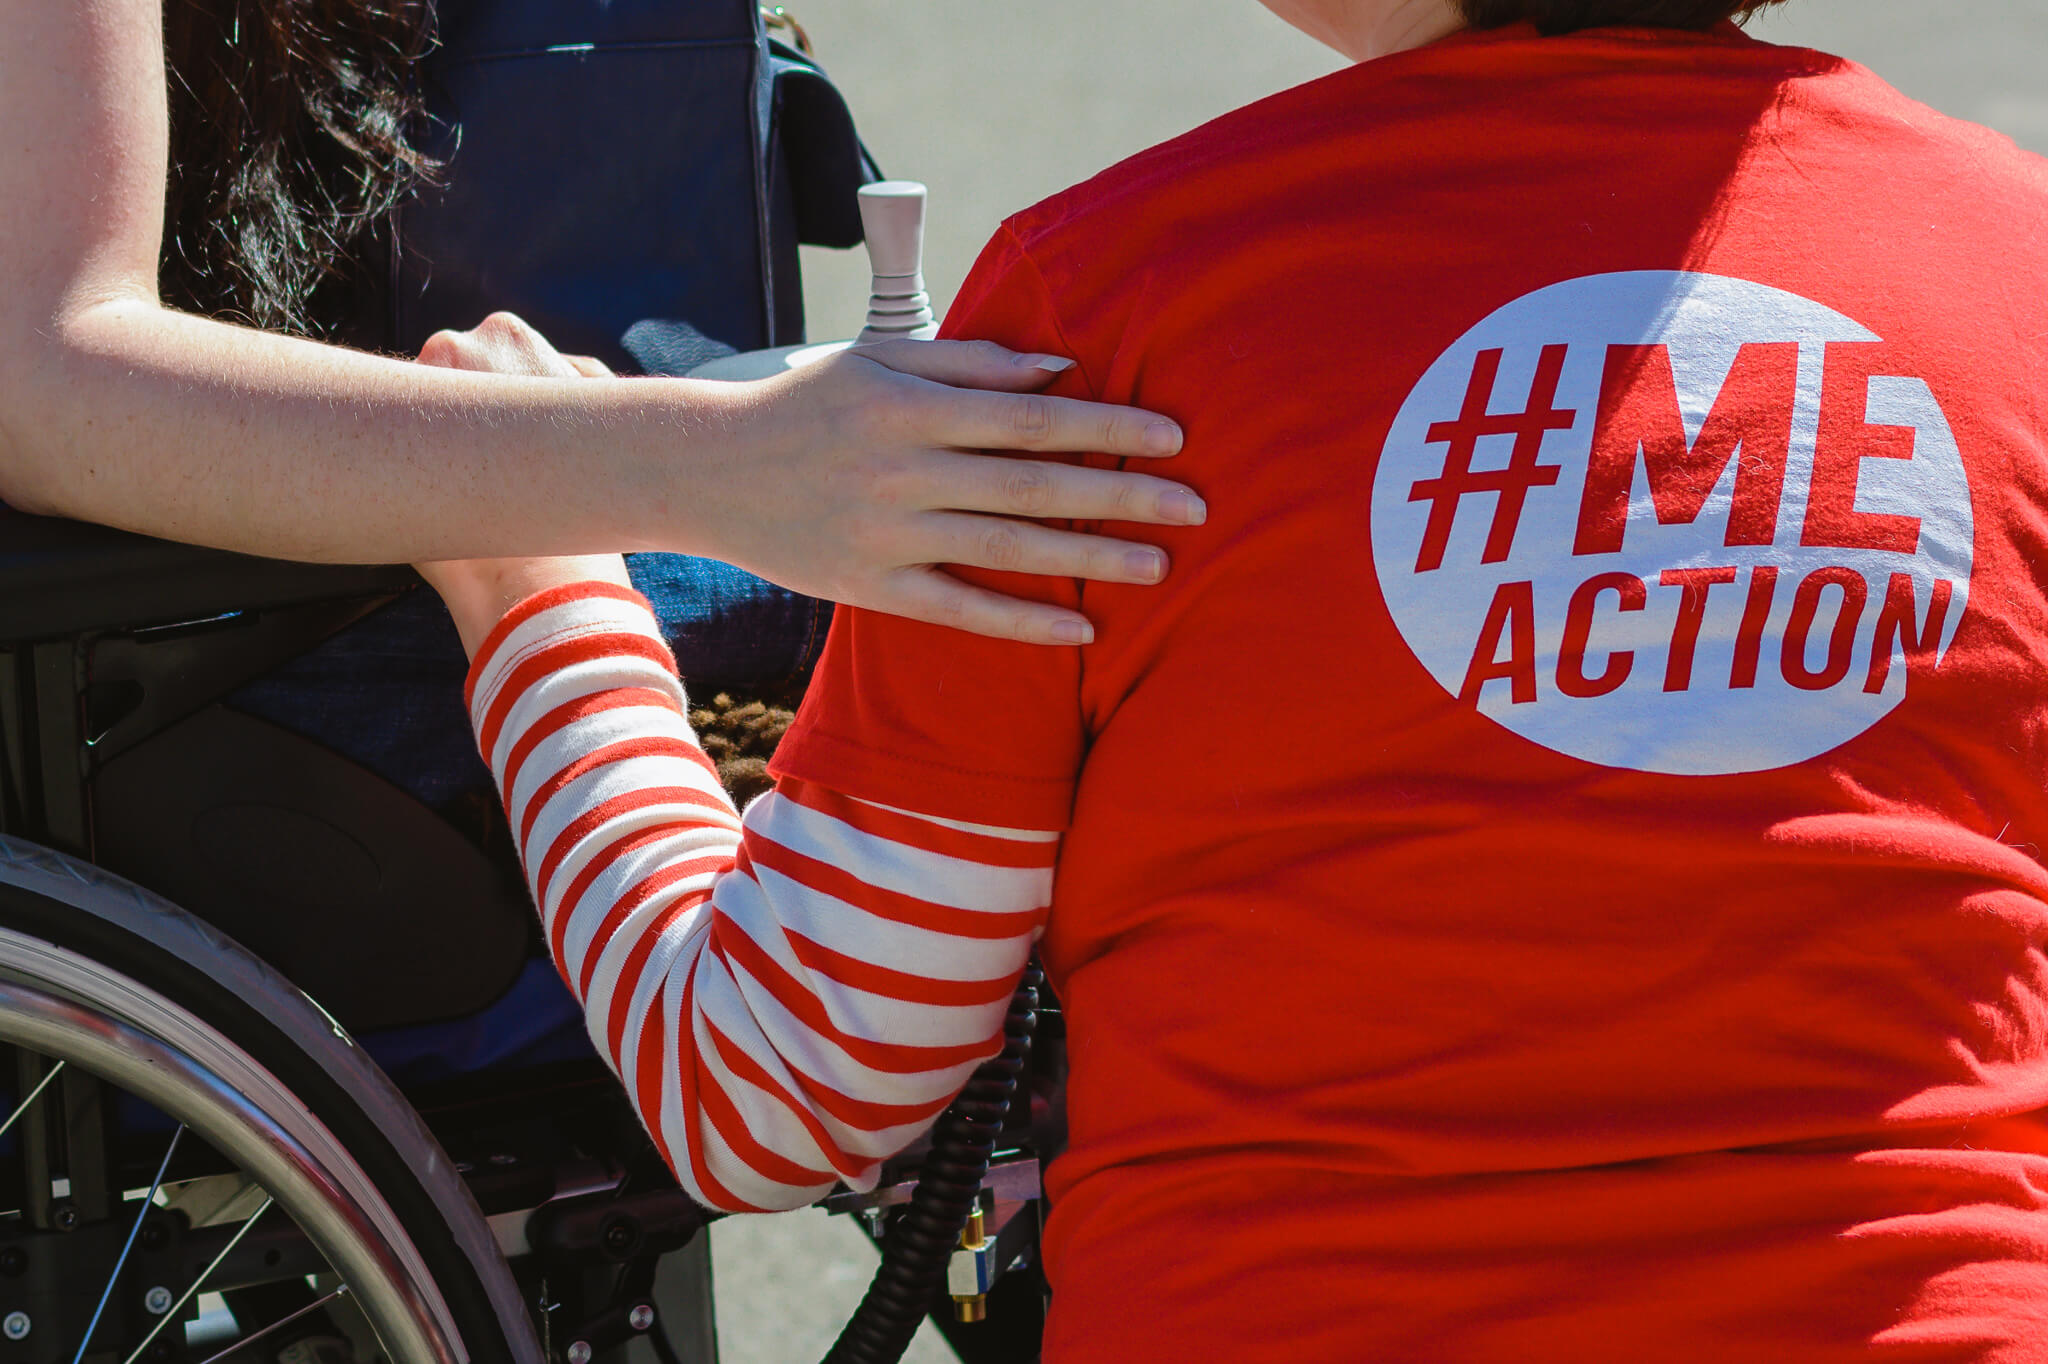 Person in #MEAction t-shirt kneels next to person in wheelchair